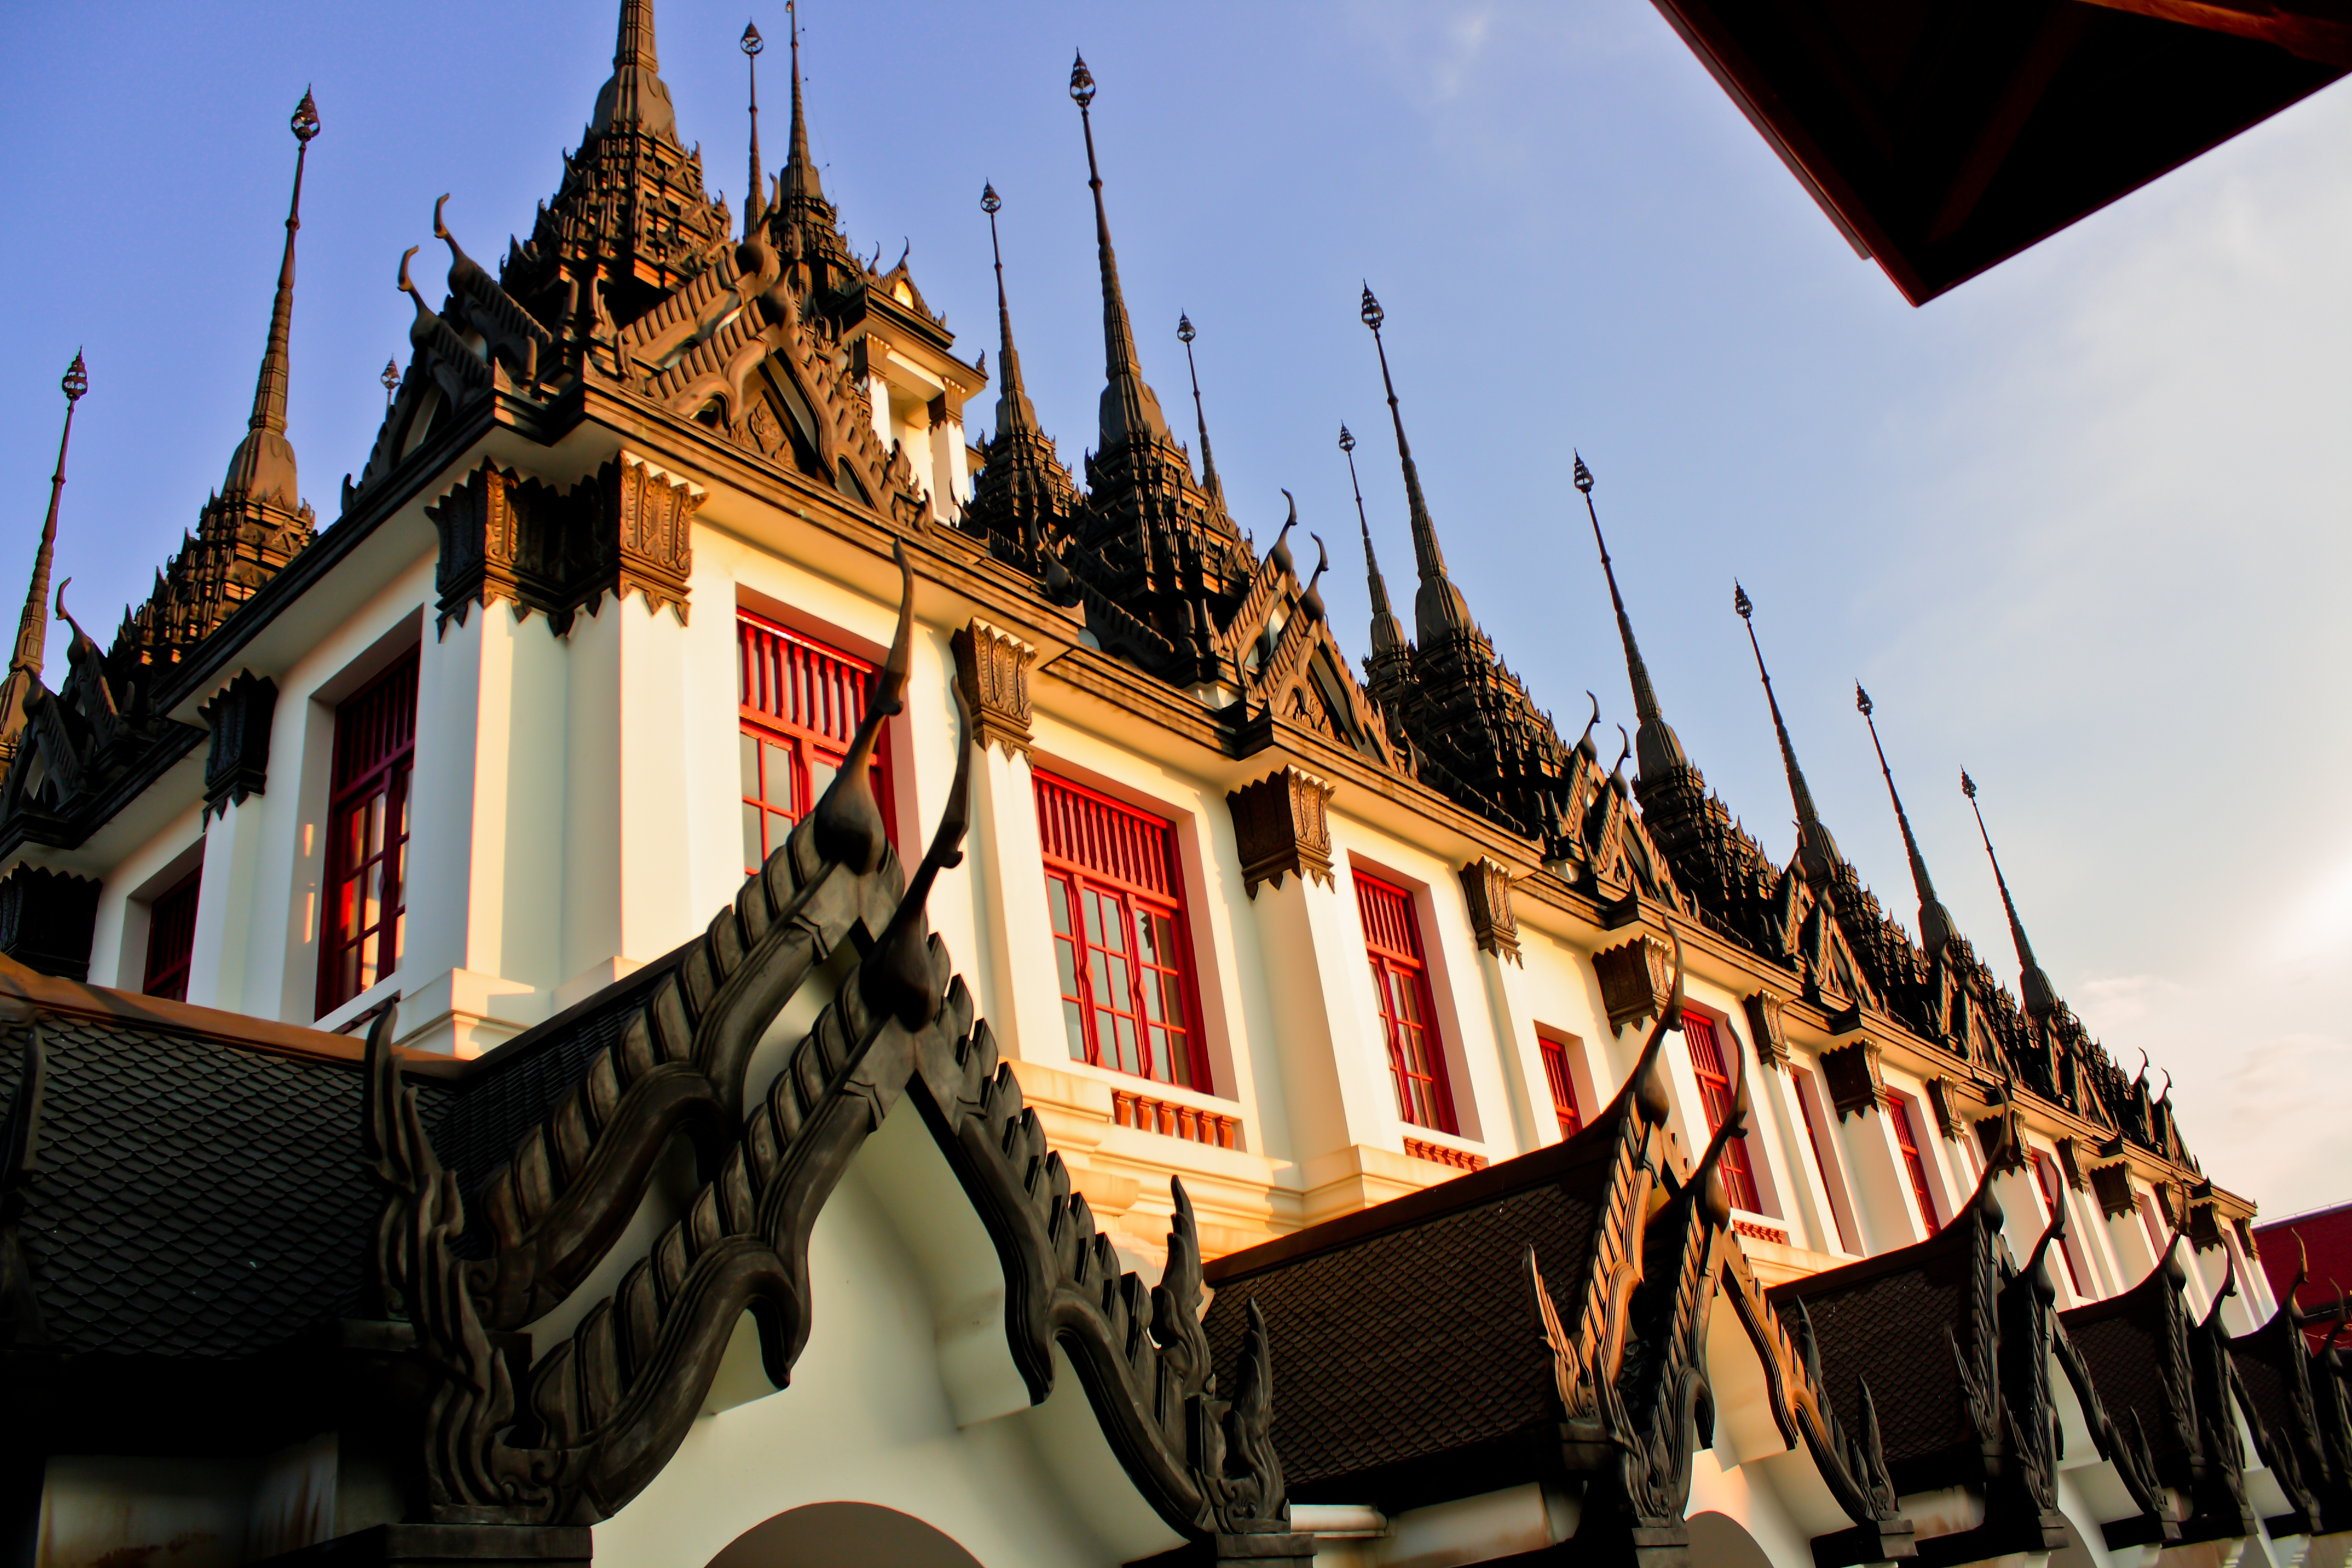 religious, wat ratchanaddaram, thailand, temples